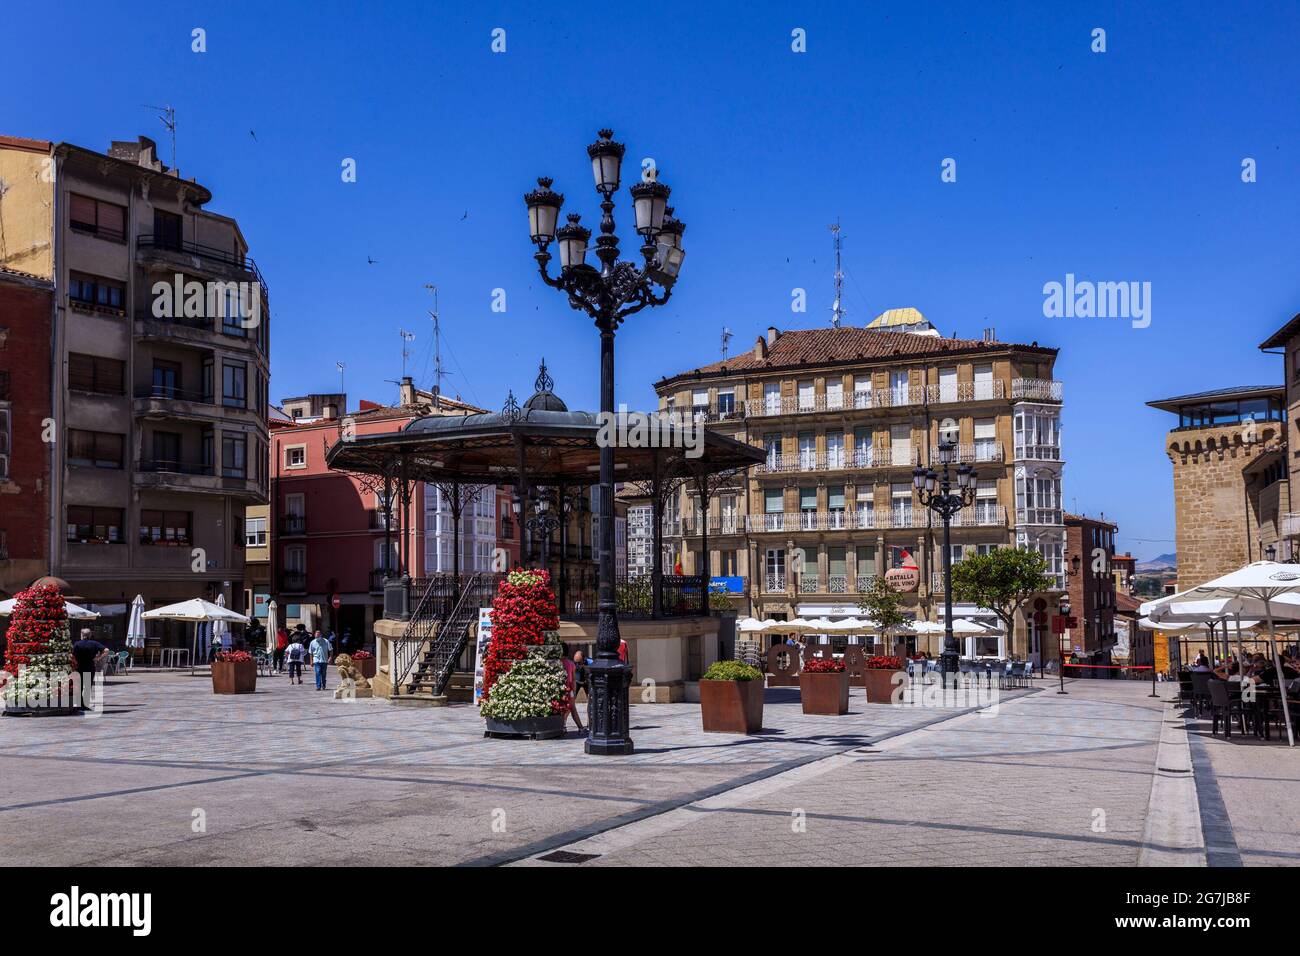 The Rioja town of Haro is at the centre of the region producing Rioja wine. People come to taste wine in the old town wineries and restaurants. Spain. Stock Photo